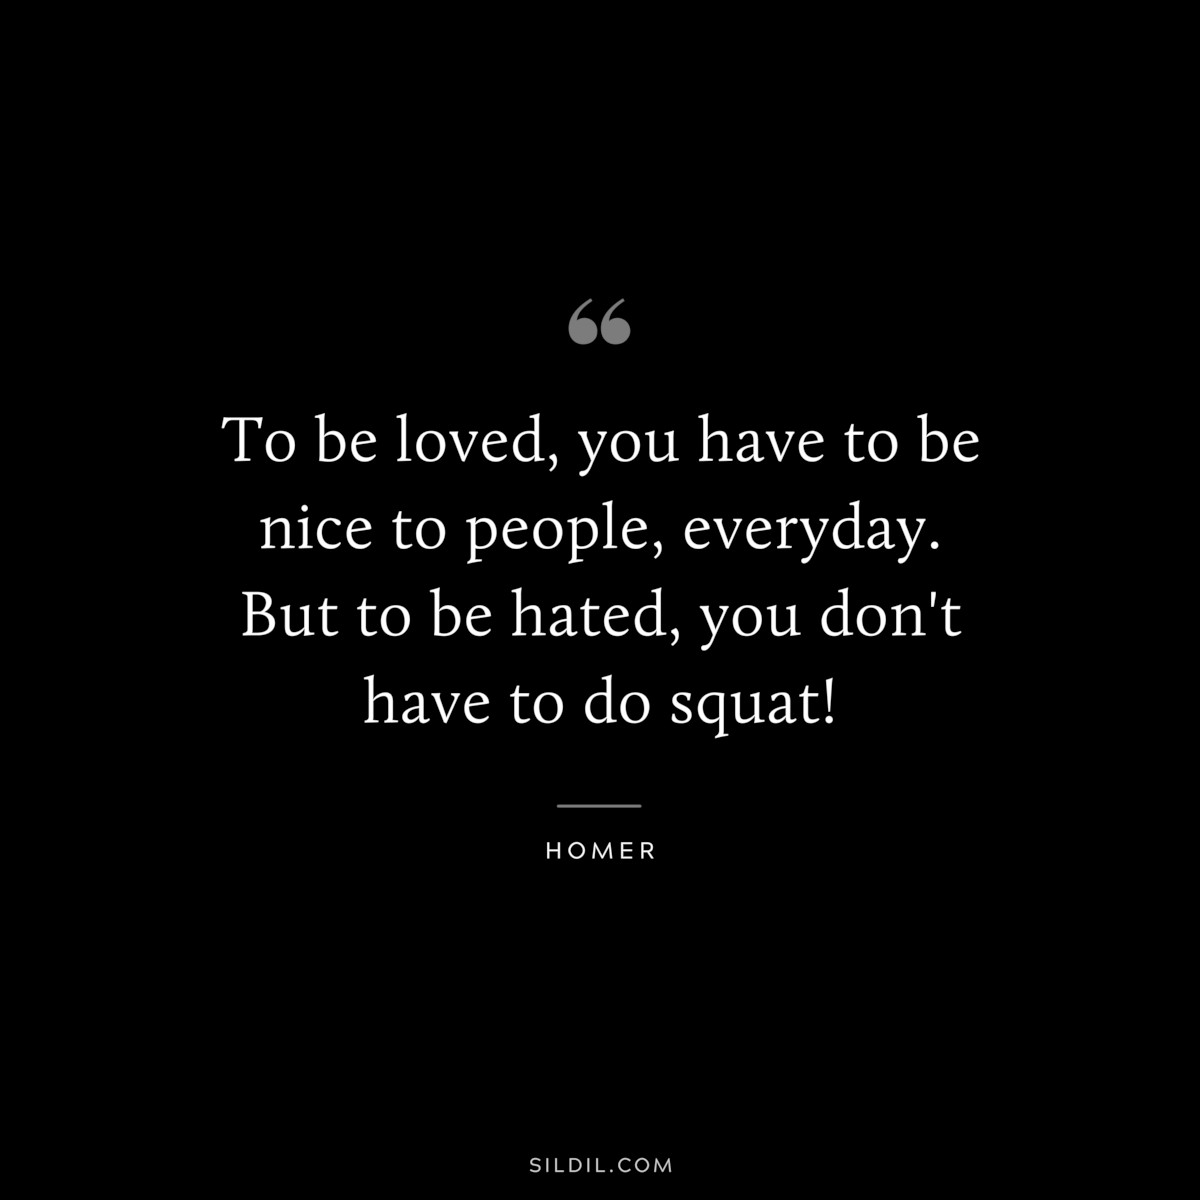 To be loved, you have to be nice to people, everyday. But to be hated, you don't have to do squat! ― Homer